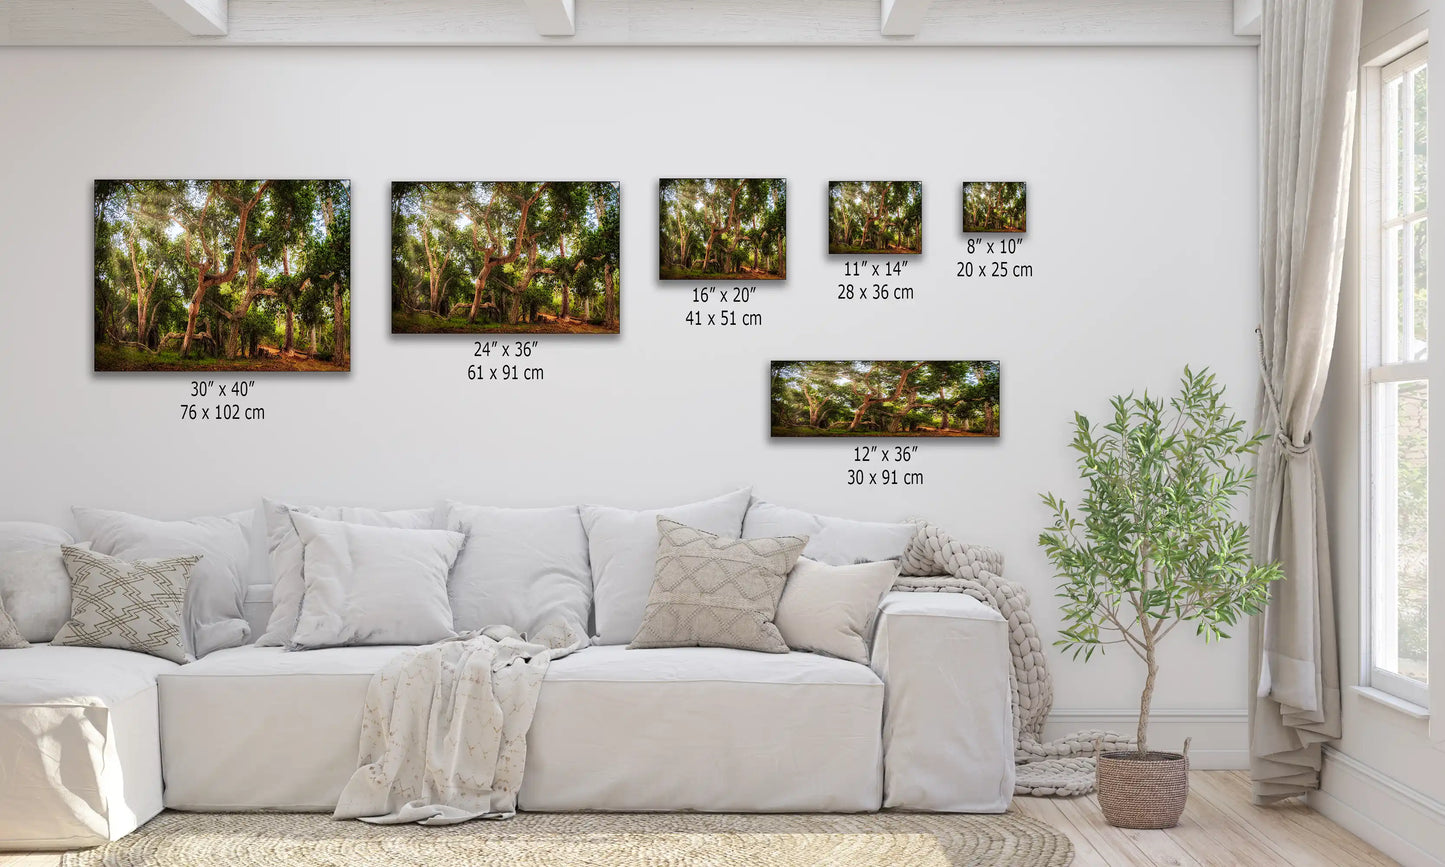 A visual scale comparison of multiple sizes of Coast Live Oak Tree wall art displayed over a couch for home decor inspiration.